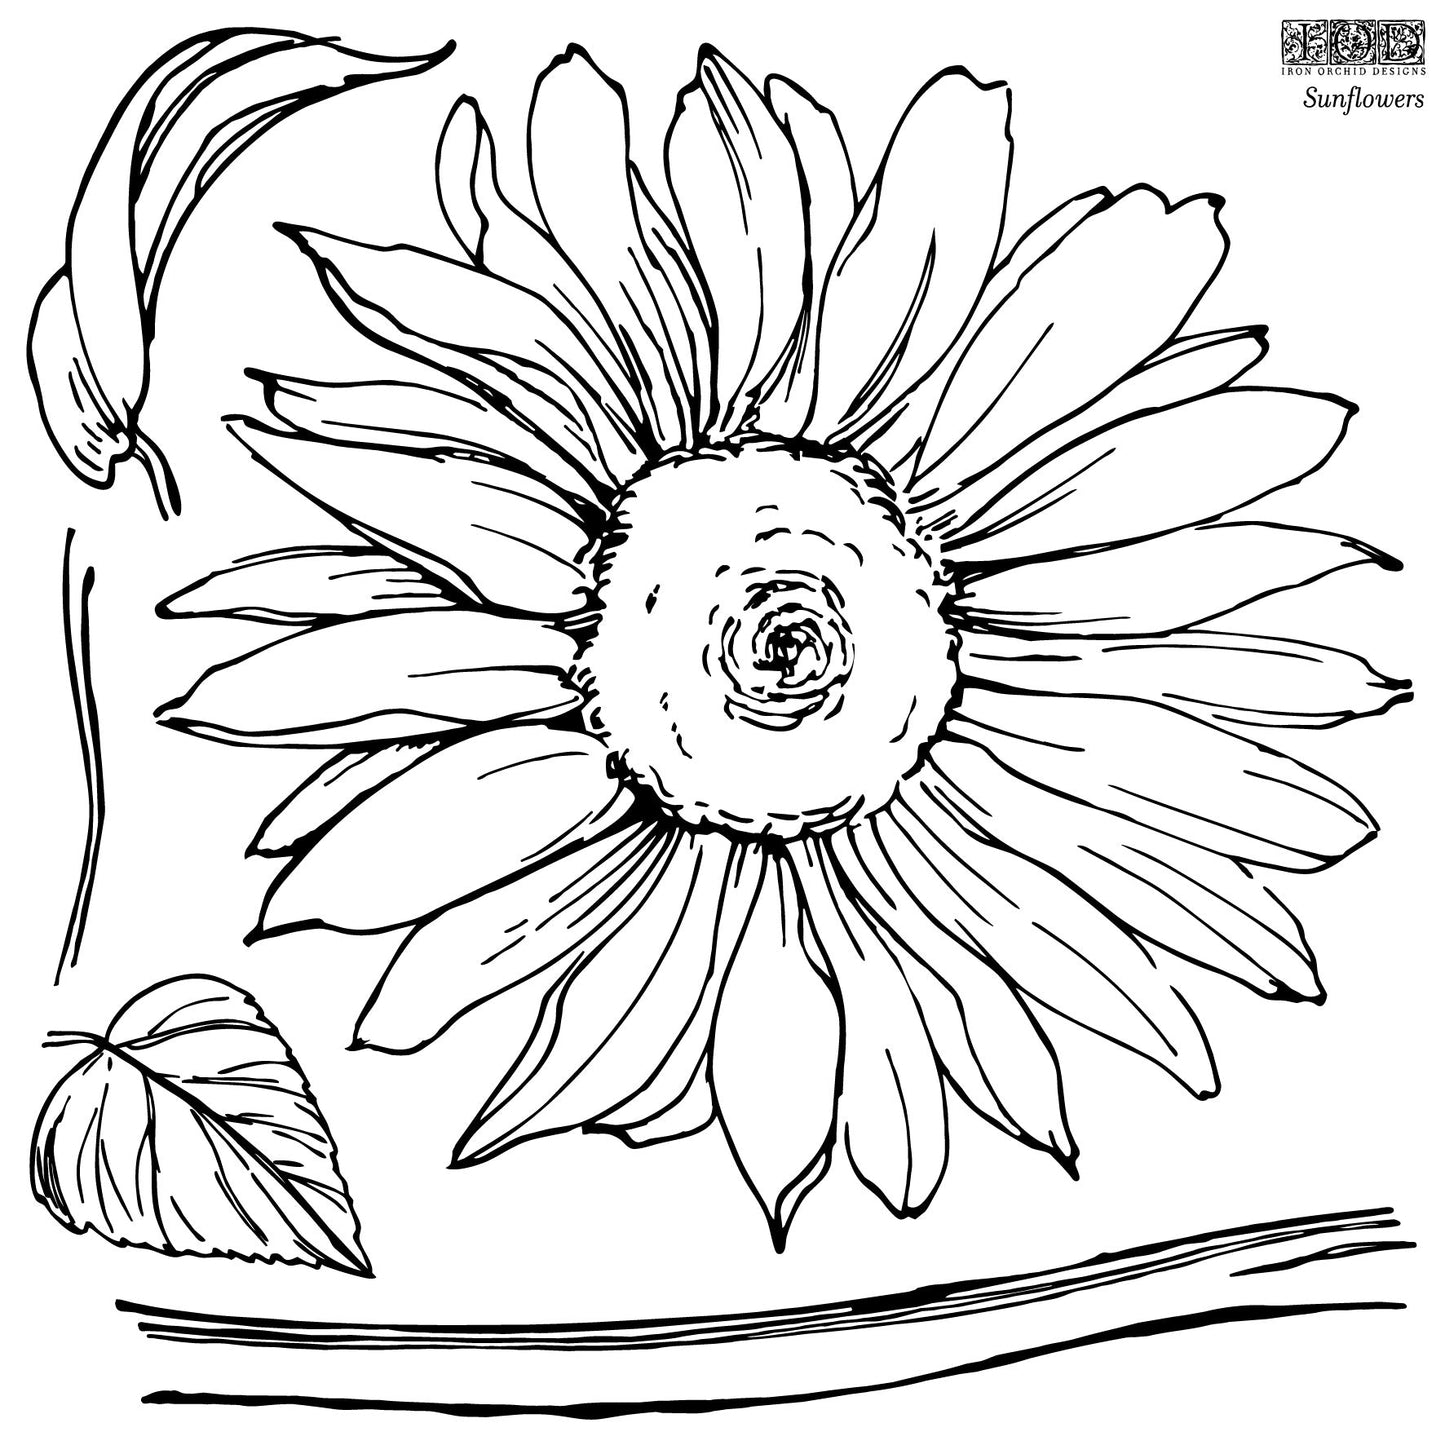 Sunflowers Stamp by Iron Orchid Designs